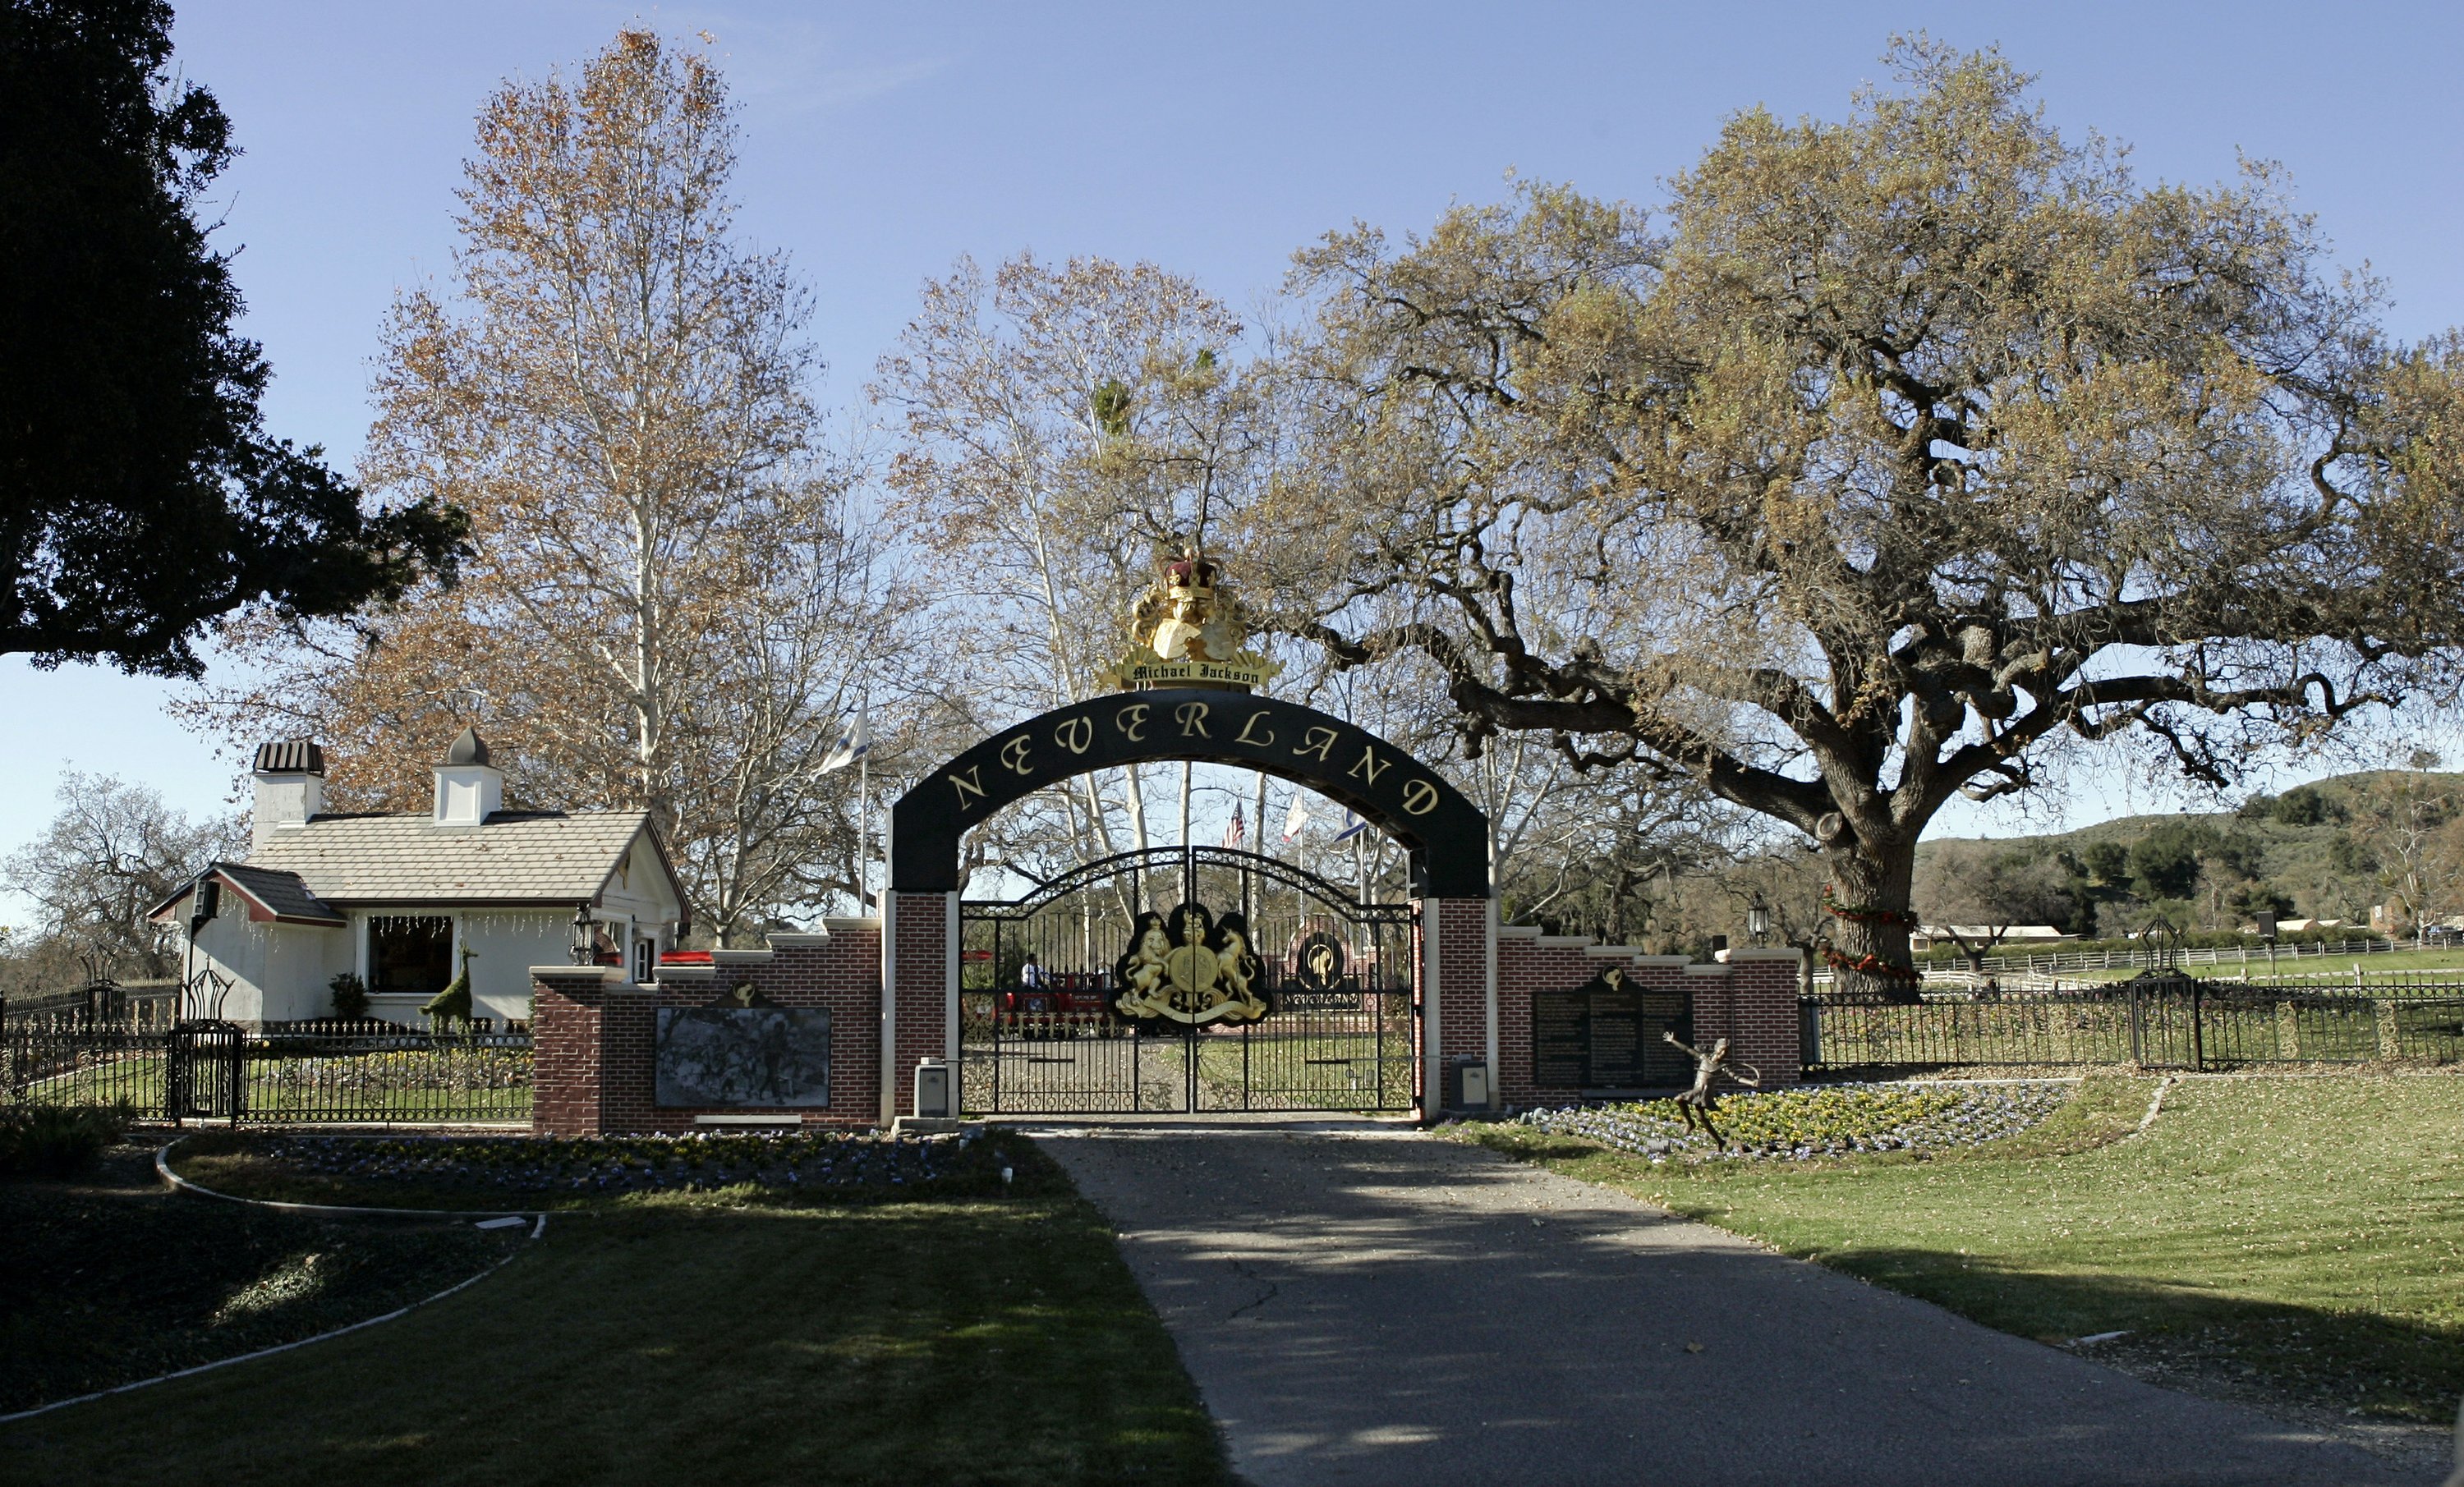 Michael Jackson’s Neverland Ranch was sold to a billionaire